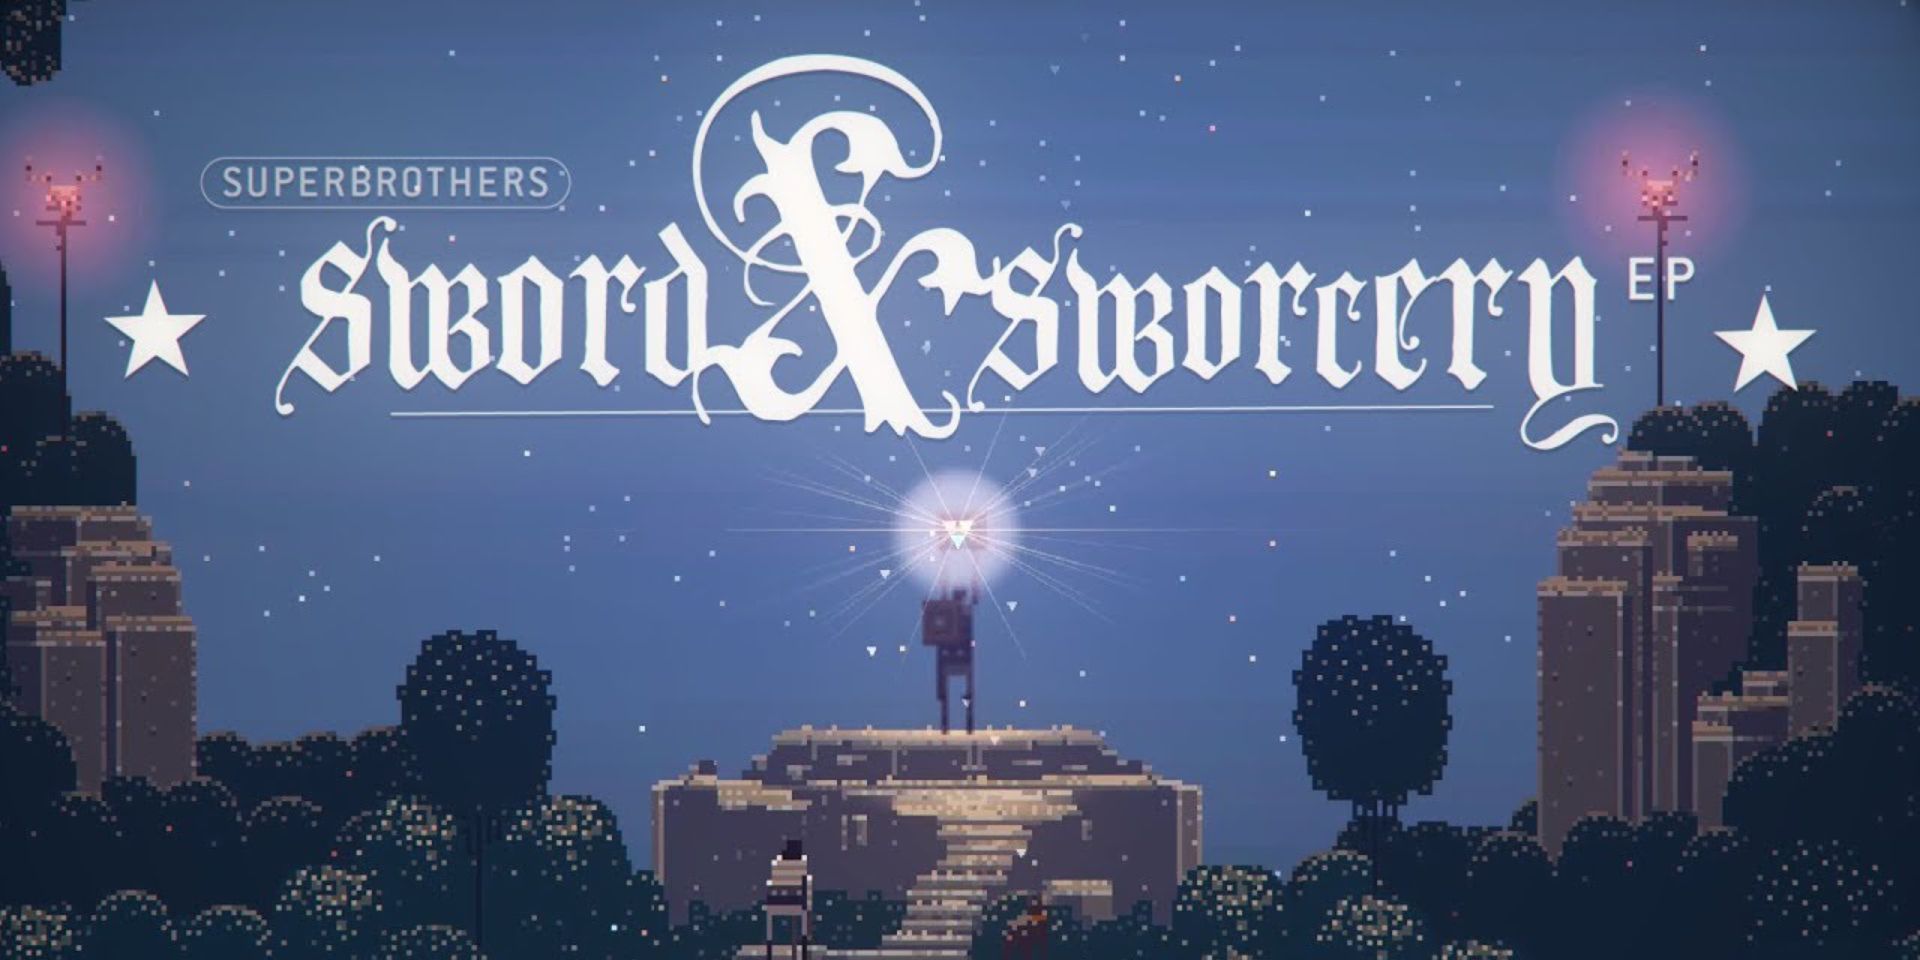 Short-Duration Video Games Superbrothers Sword &amp; Sworcery EP